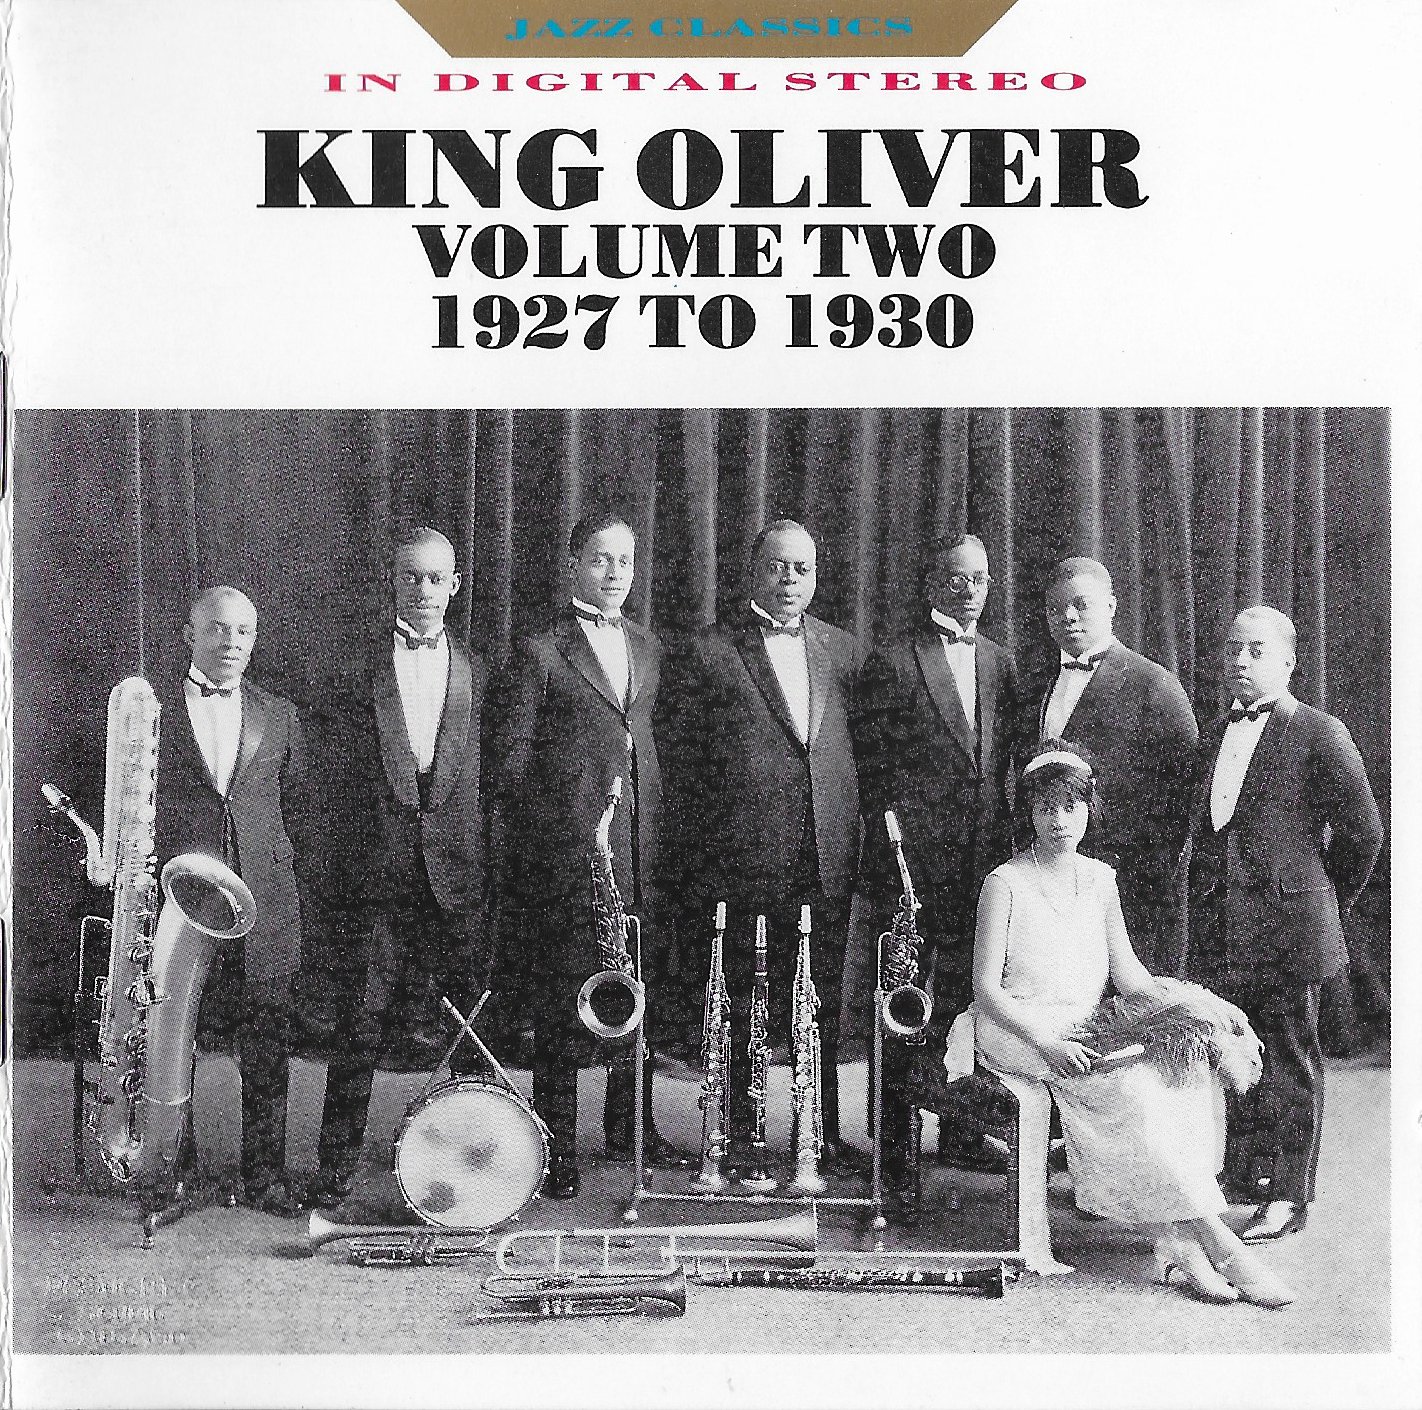 Picture of King Oliver - Volume 2 1927 - 1930 by artist Joe Oliver from the BBC cds - Records and Tapes library